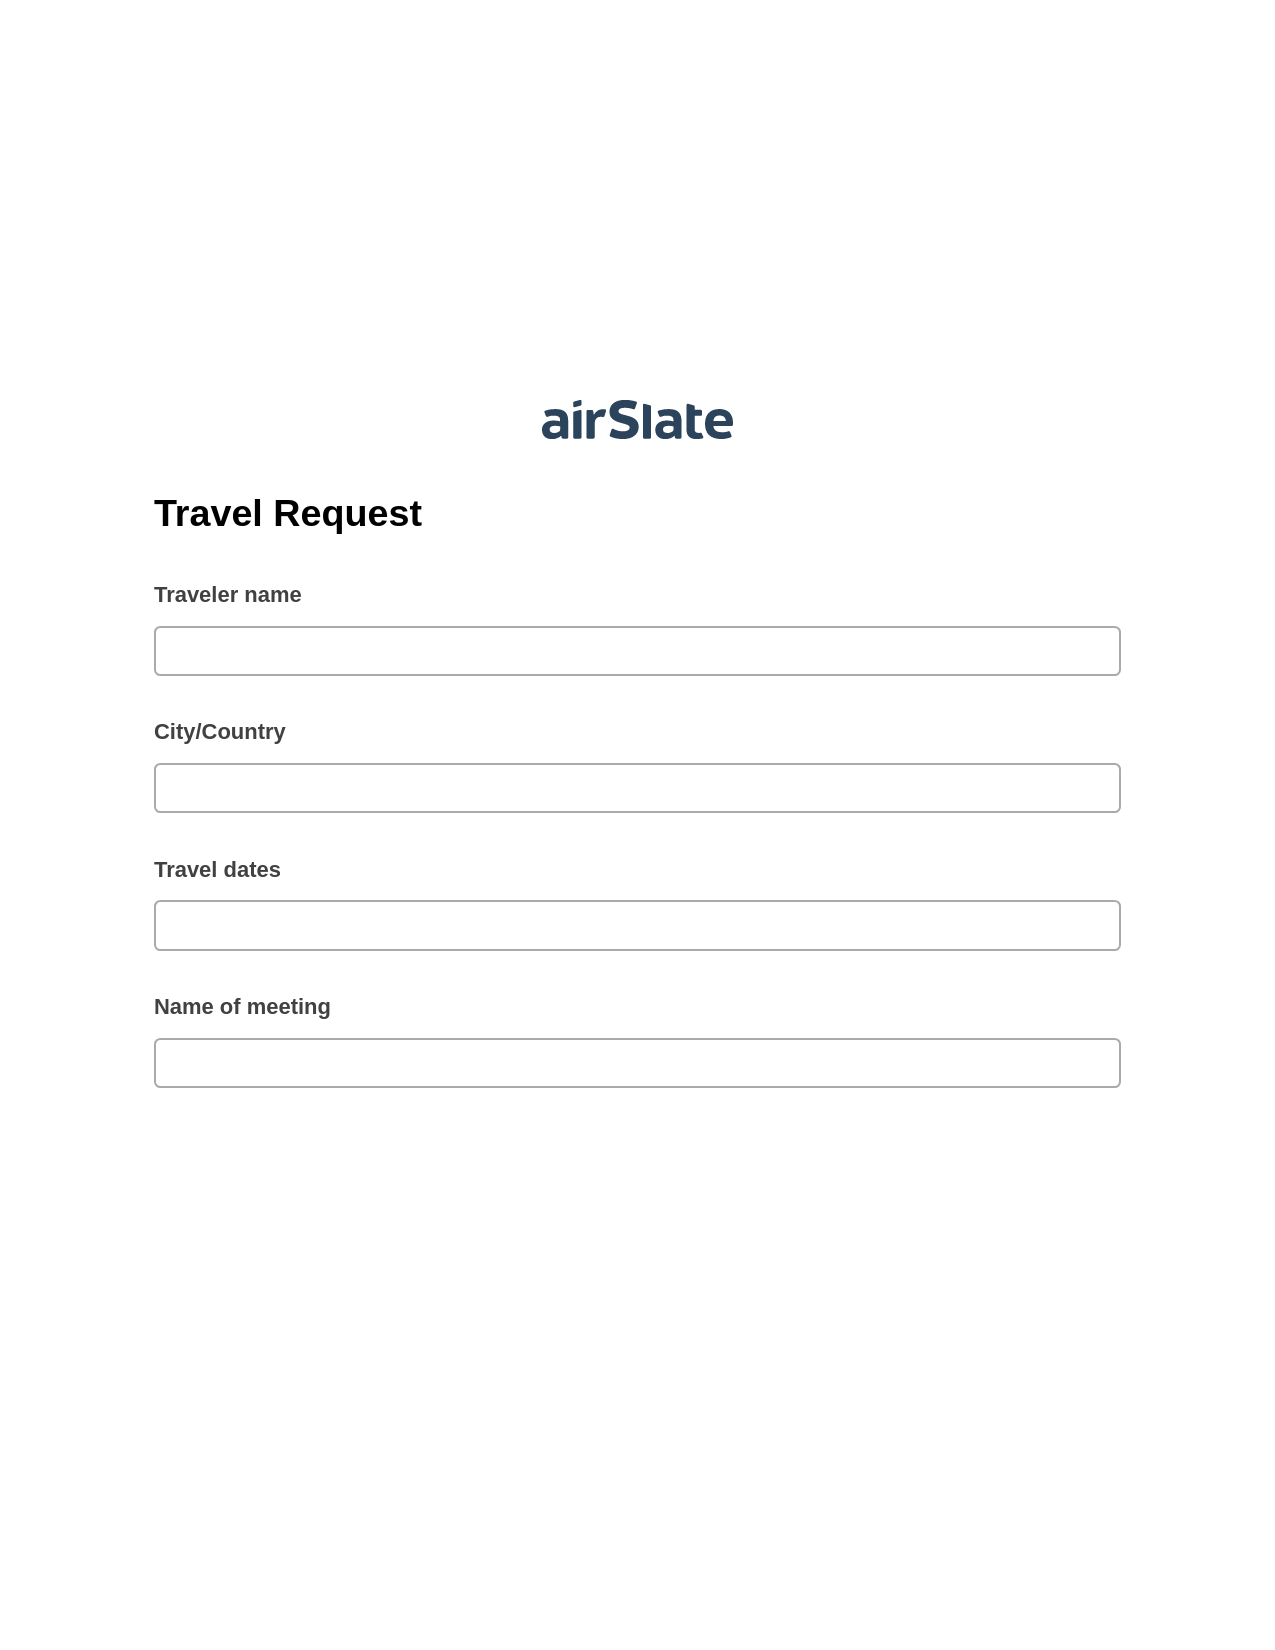 Travel Request Pre-fill from another Slate Bot, Pre-fill with Custom Data Bot, Export to MySQL Bot